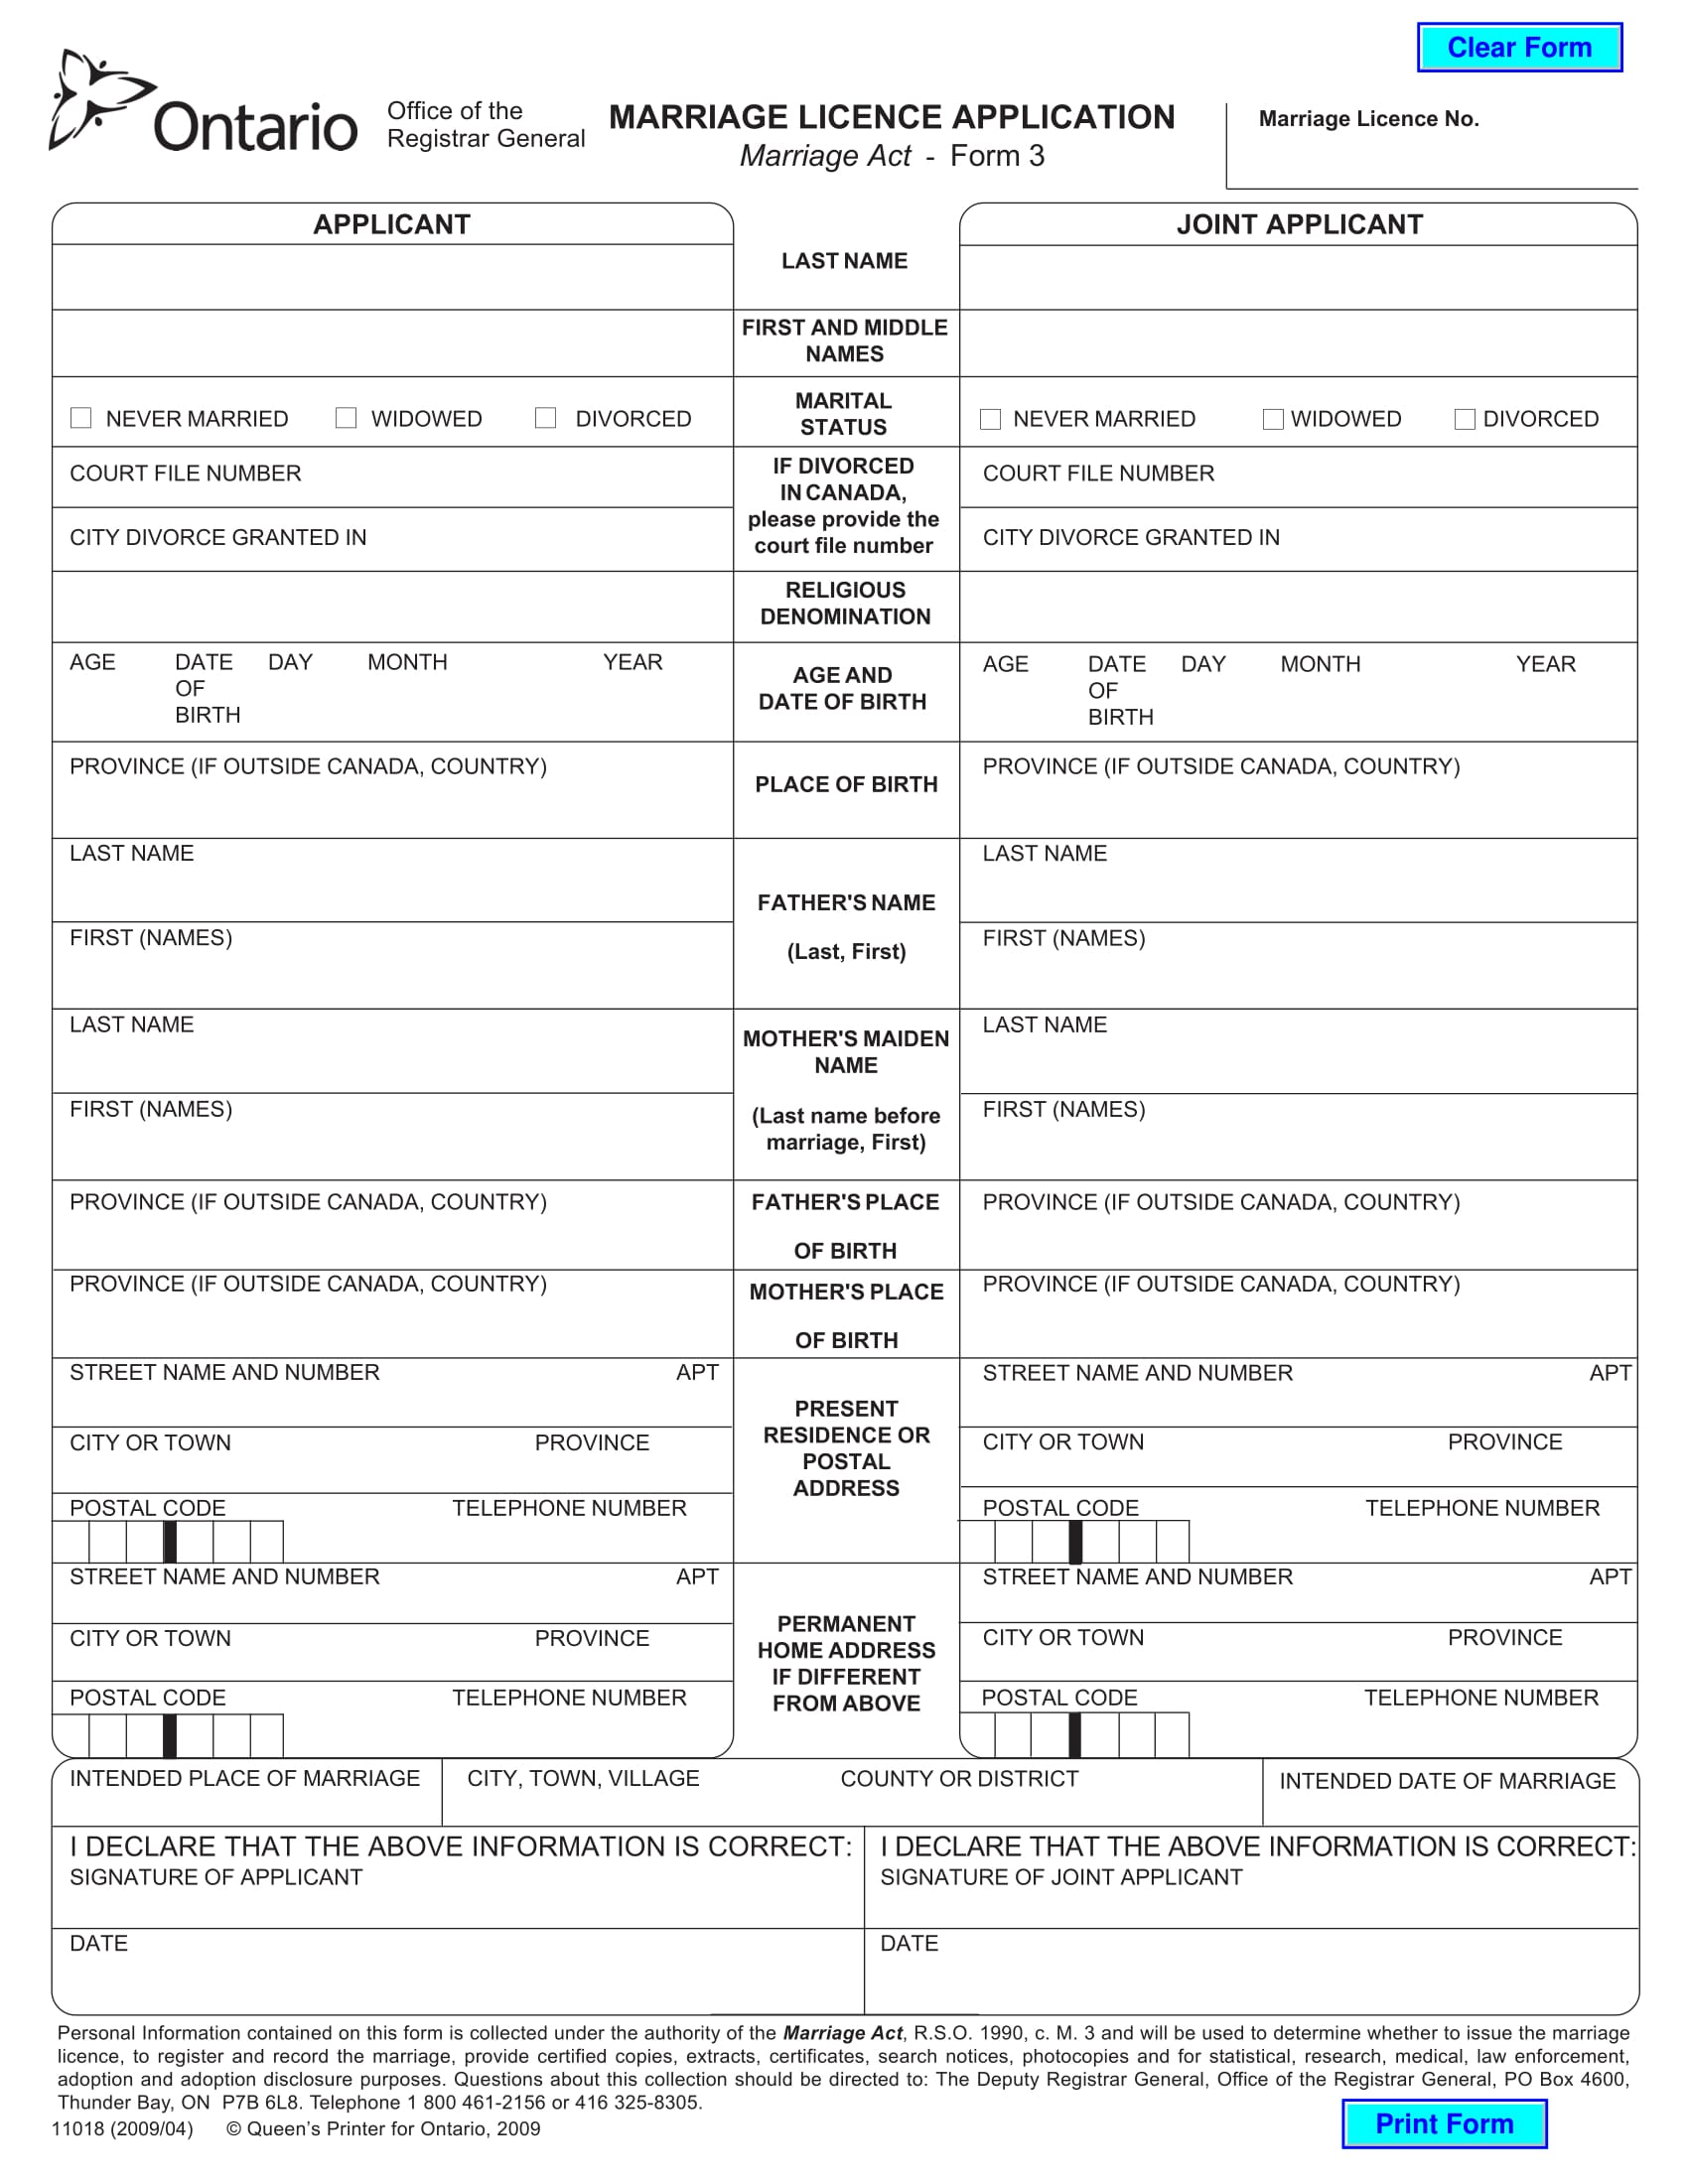 marrriage license application form 1